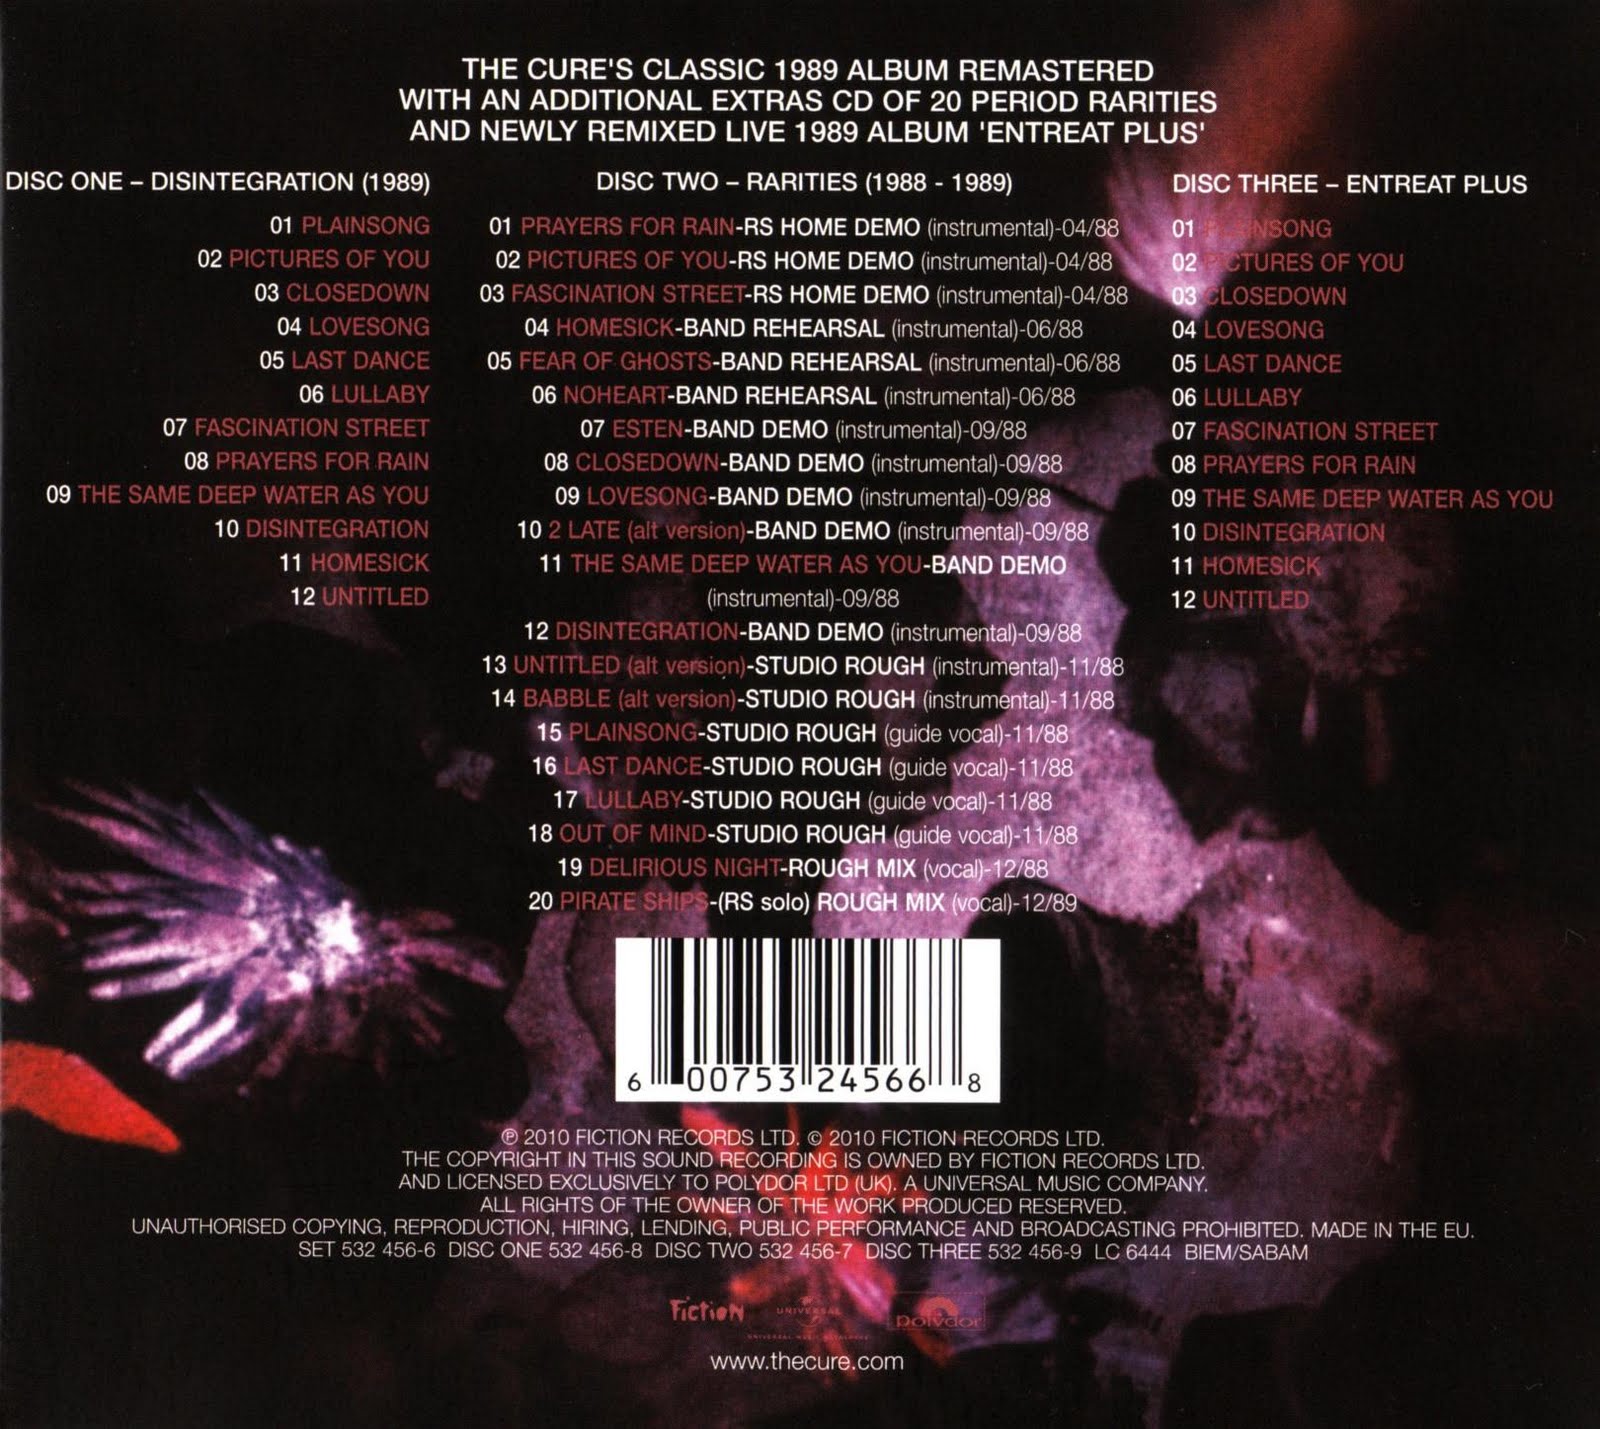 The Cure - Disintegration [Remastered Deluxe Edition] (2010) FLAC